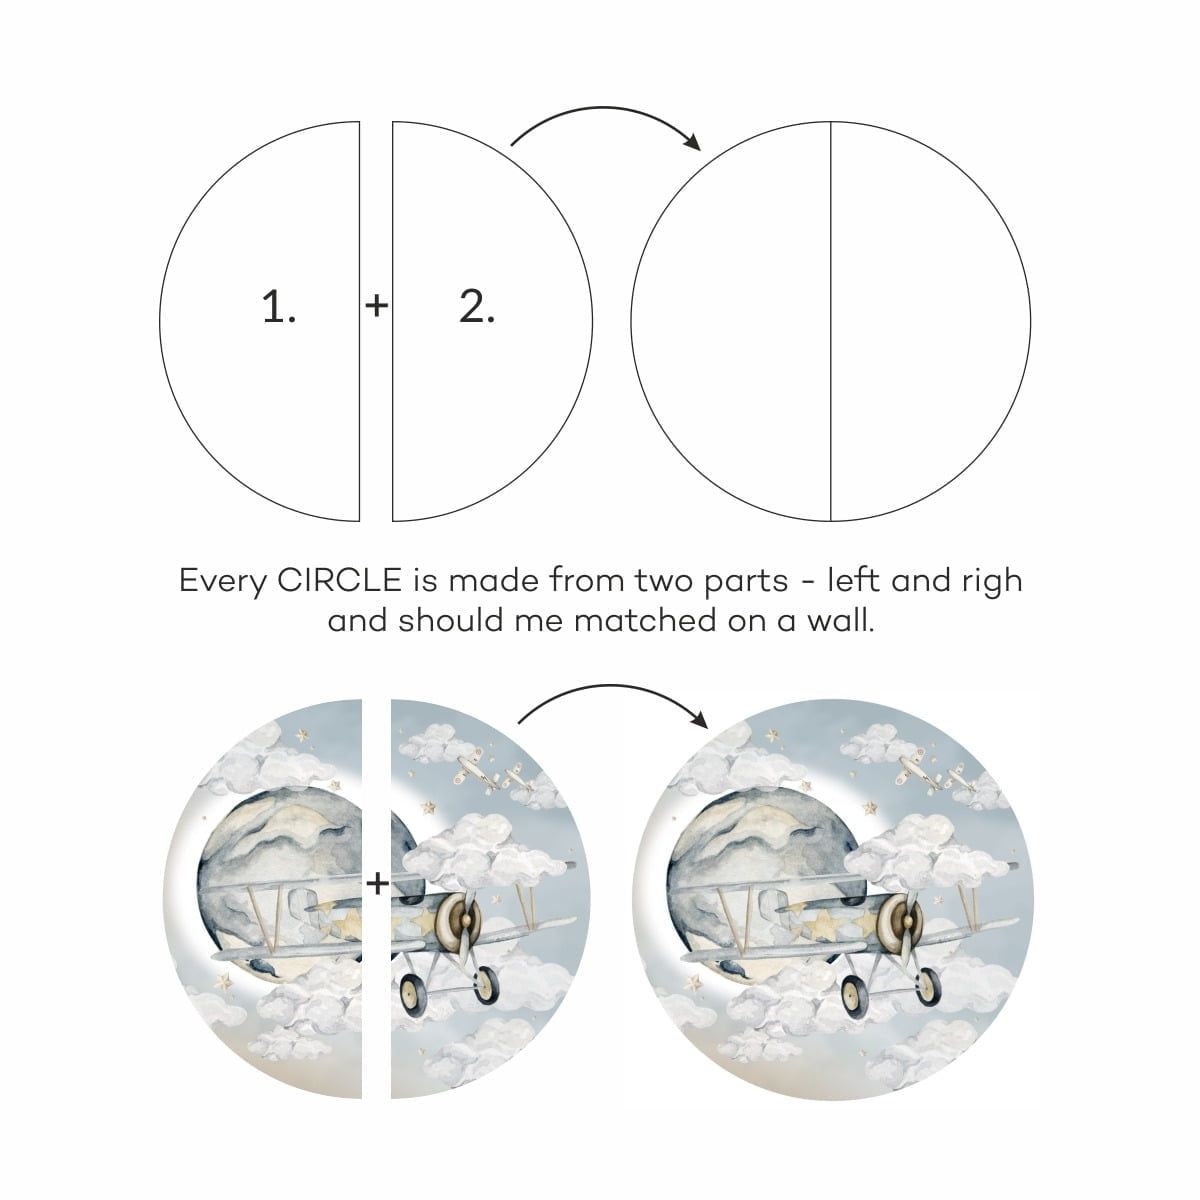 Dekornik, plane in a circle, wall stickers for children's room Dekornik, plane in a circle, wall stickers for children's room